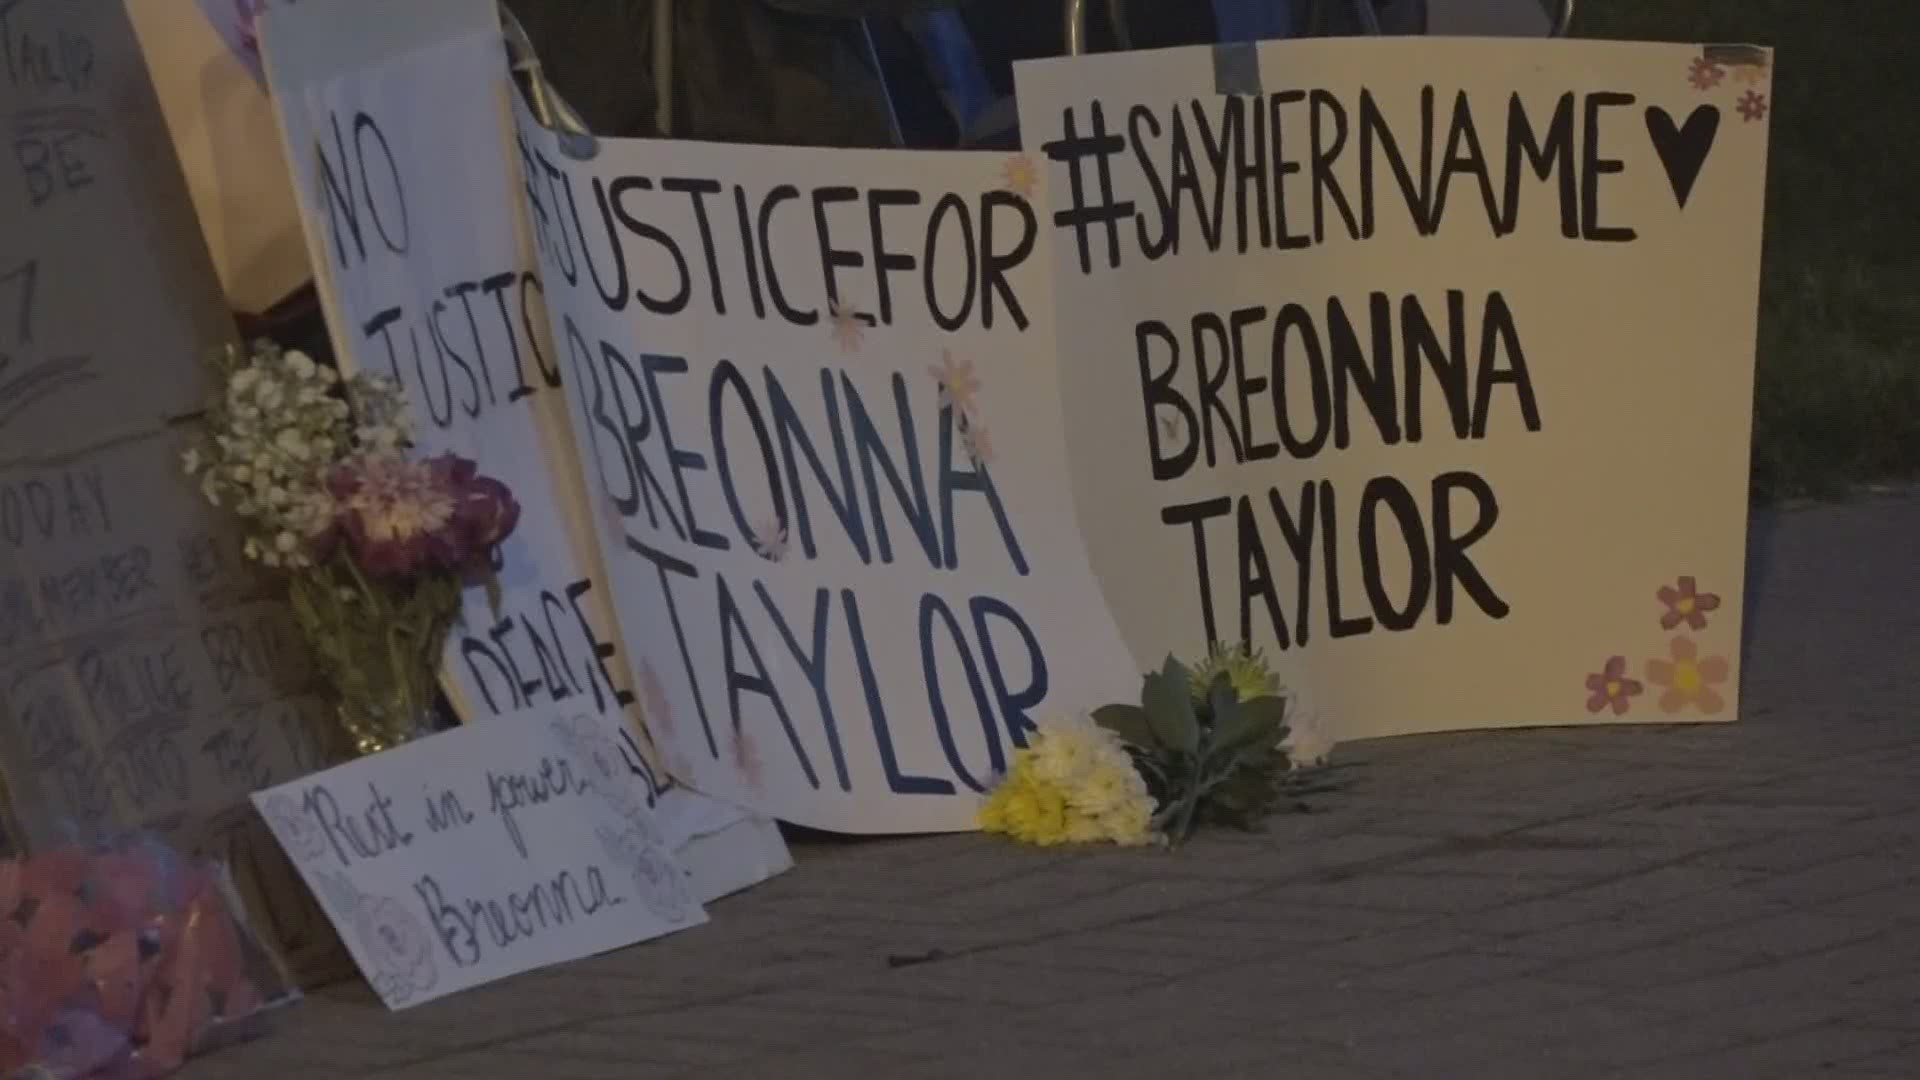 Friday would have been Breonna Taylor's 27th birthday. Her family held a vigil for her tonight in downtown Grand Rapids.